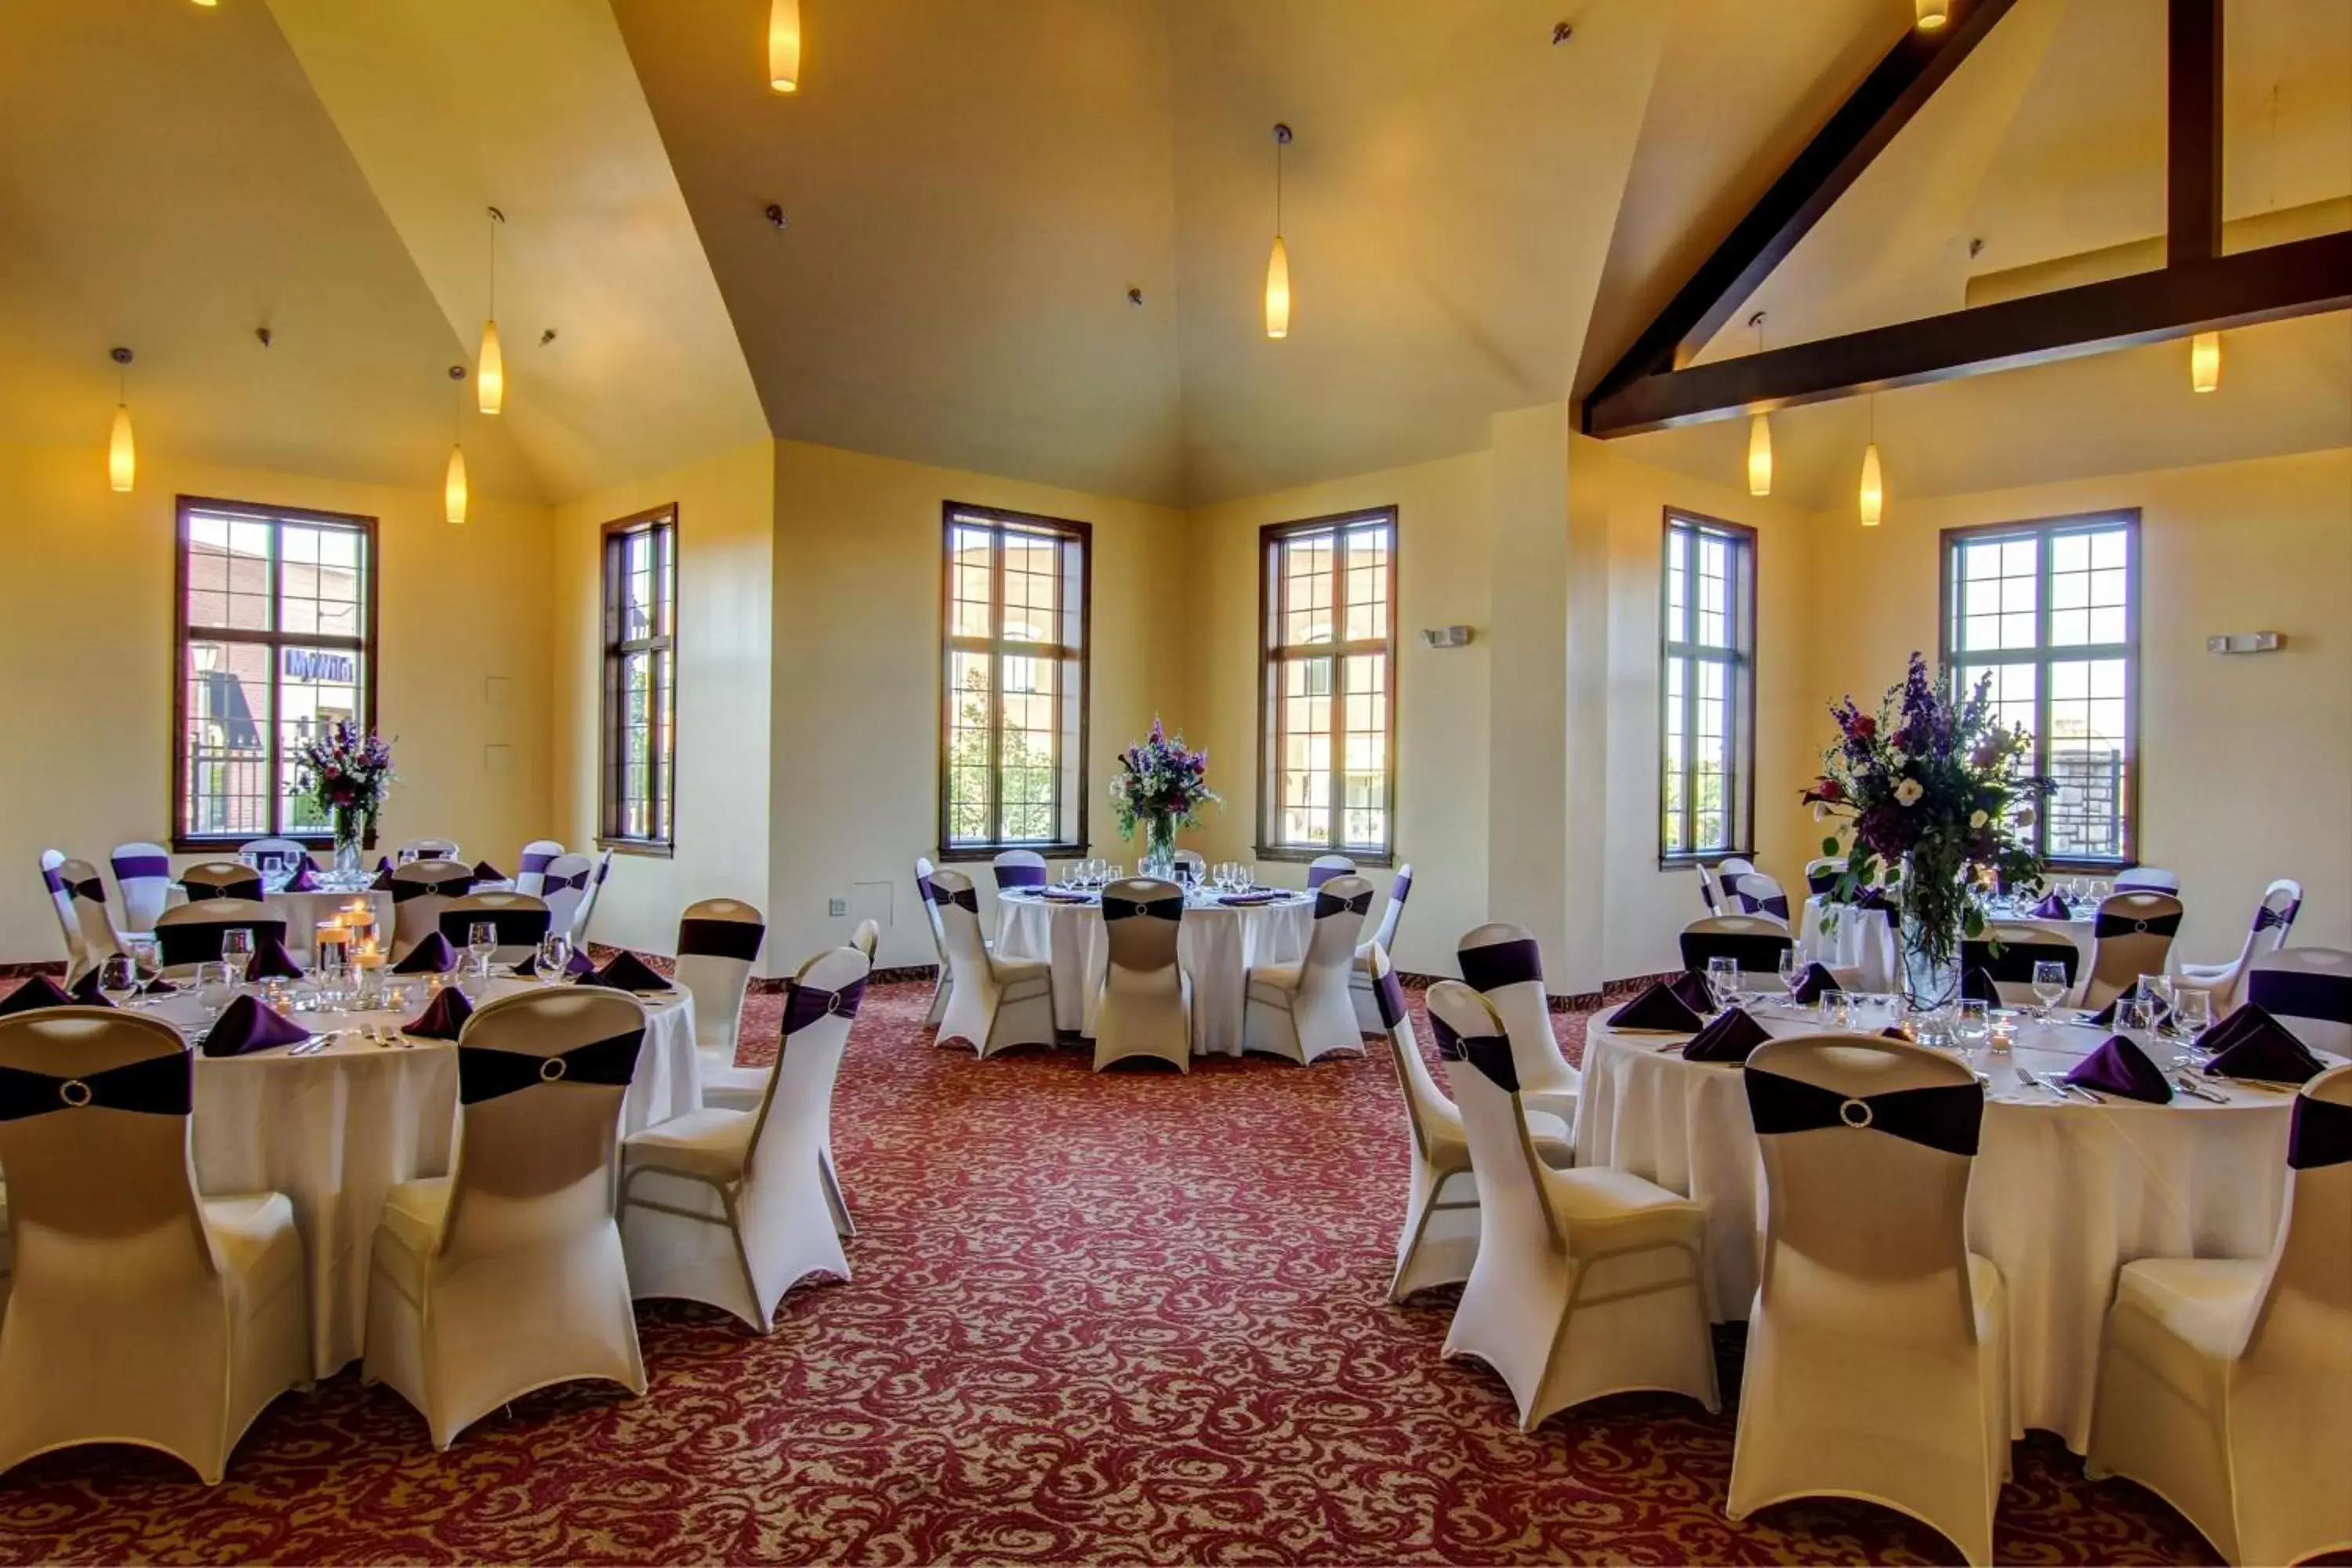 Banquet/Function facilities, Banquet Facilities in The Wildwood Hotel